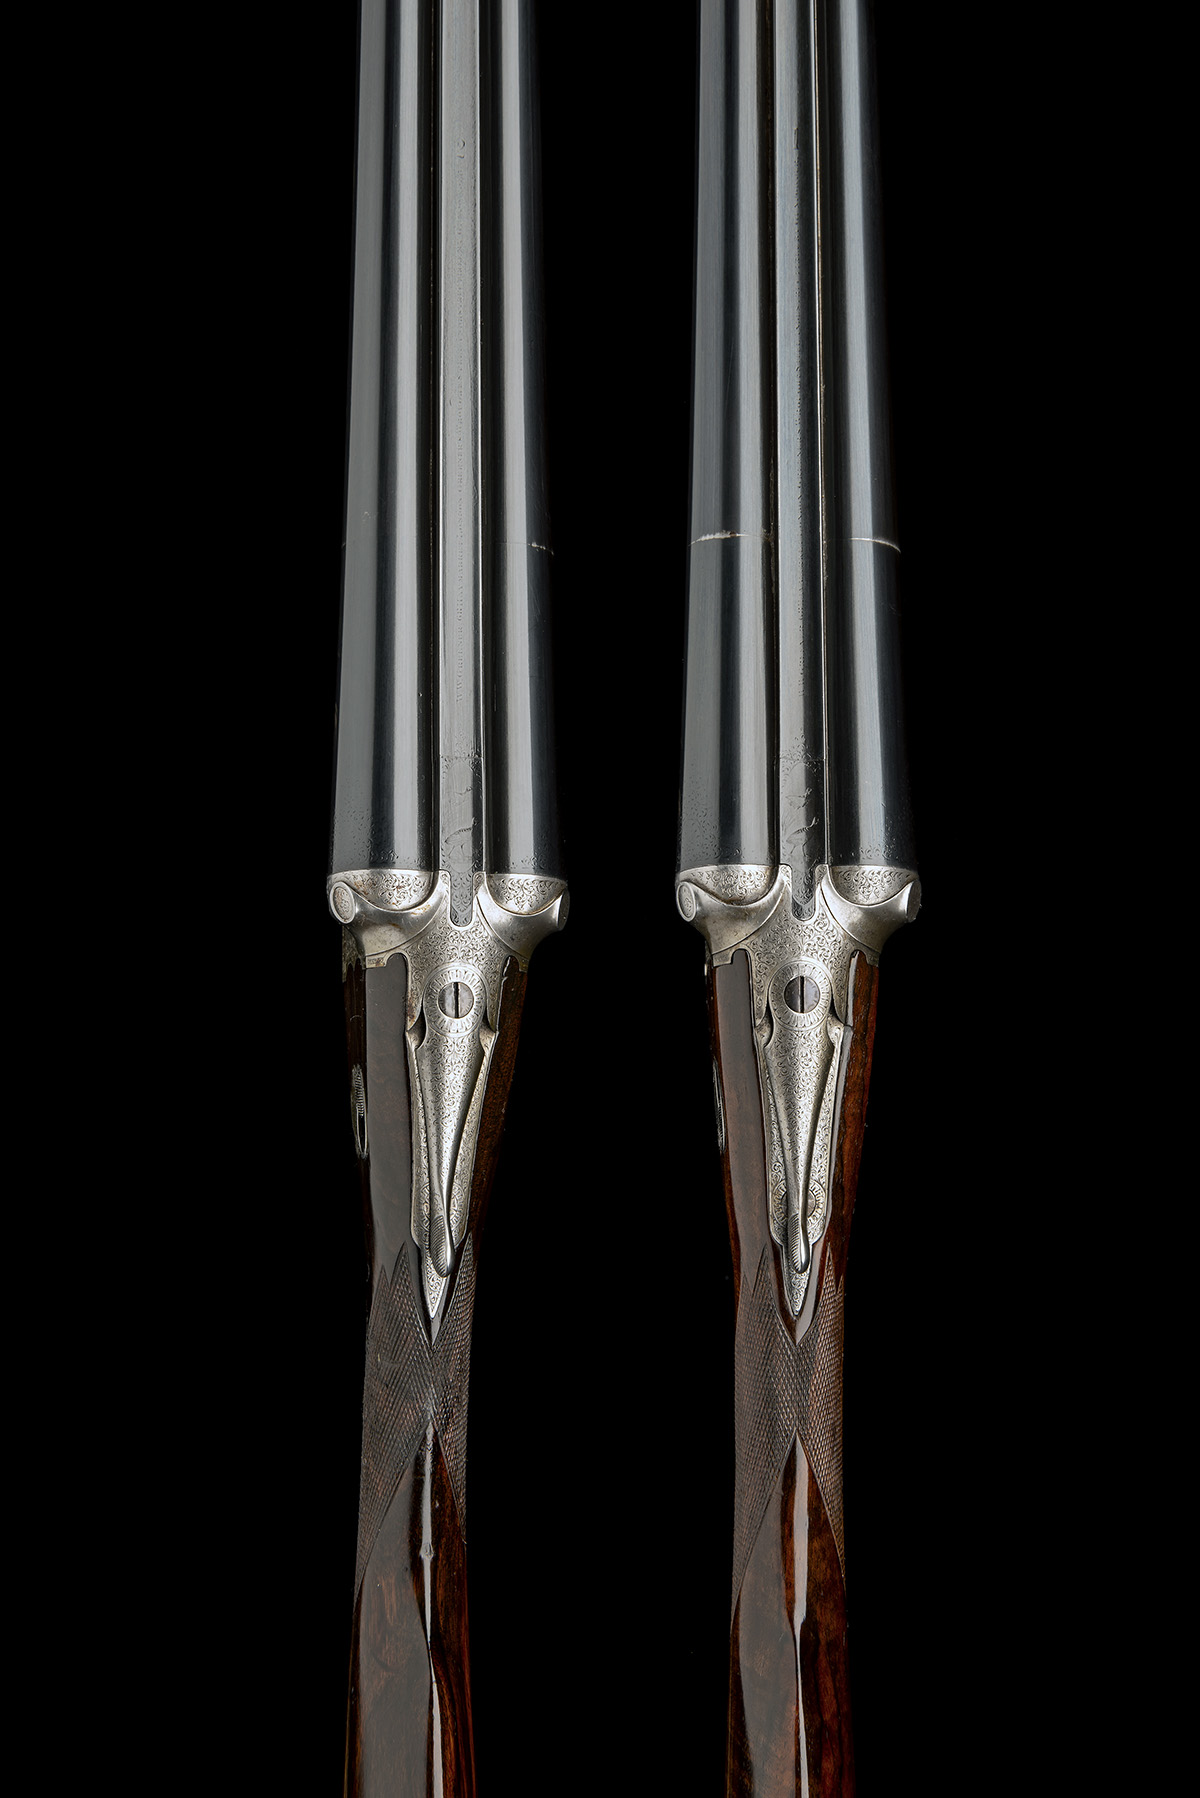 W.W. GREENER A PAIR OF 12-BORE 'G3 MONARCH' BOXLOCK EJECTORS, serial no. 47725 / 6, 28in. sleeved - Image 4 of 9